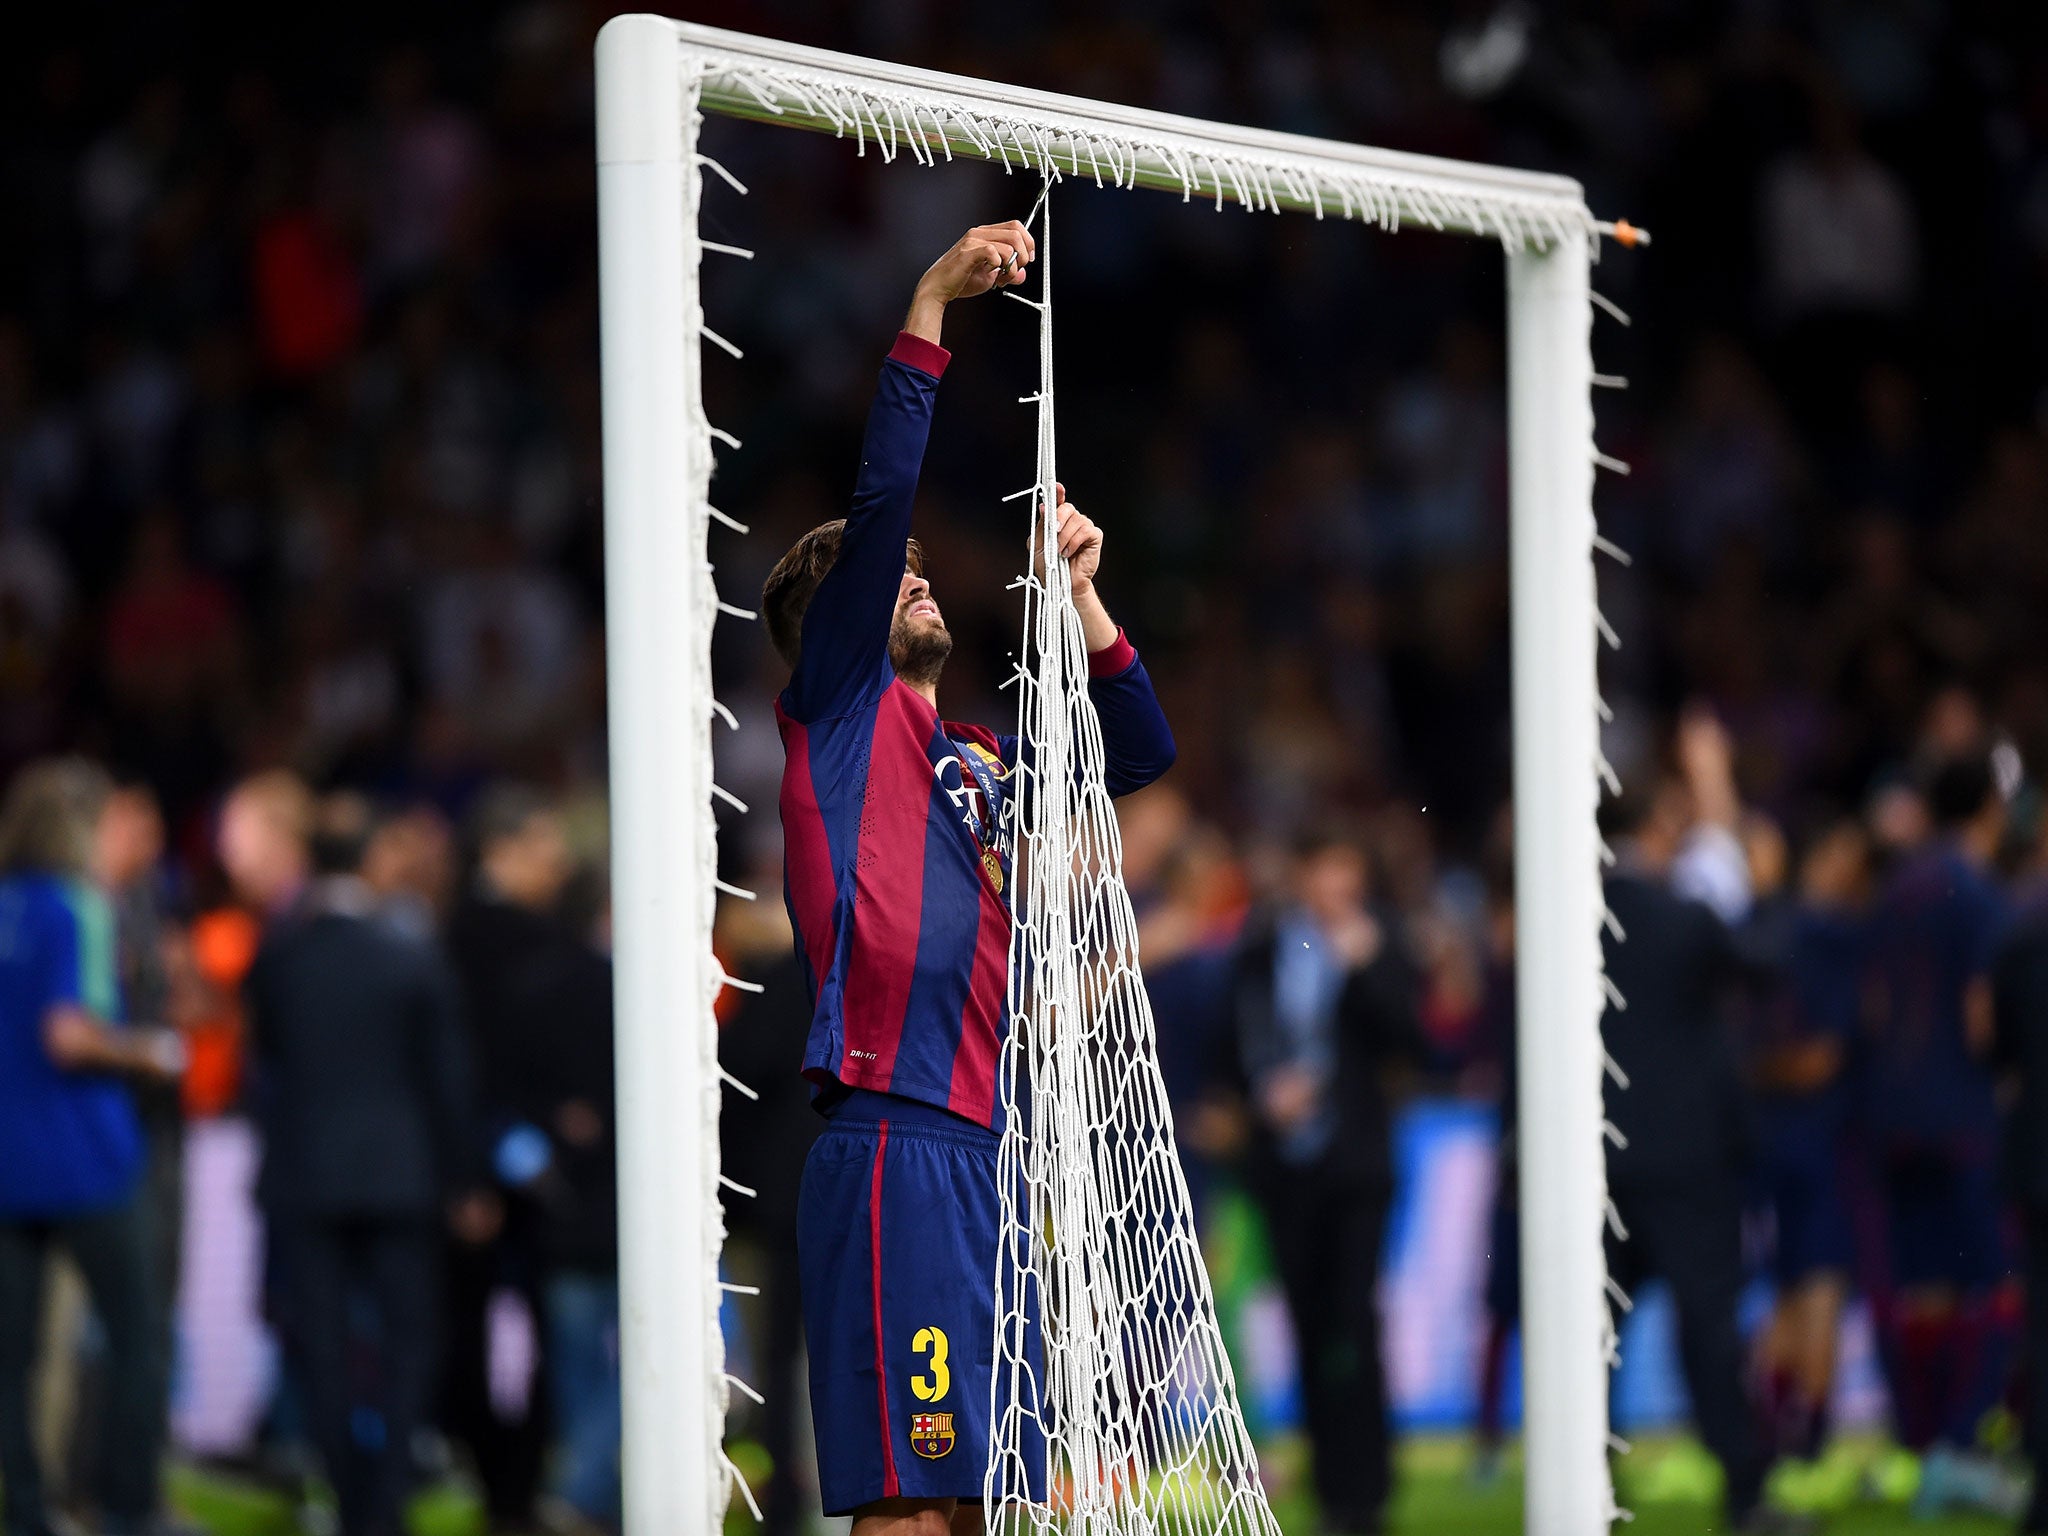 Gerard Pique cuts down the goal net after the Champions League final win over Juventus